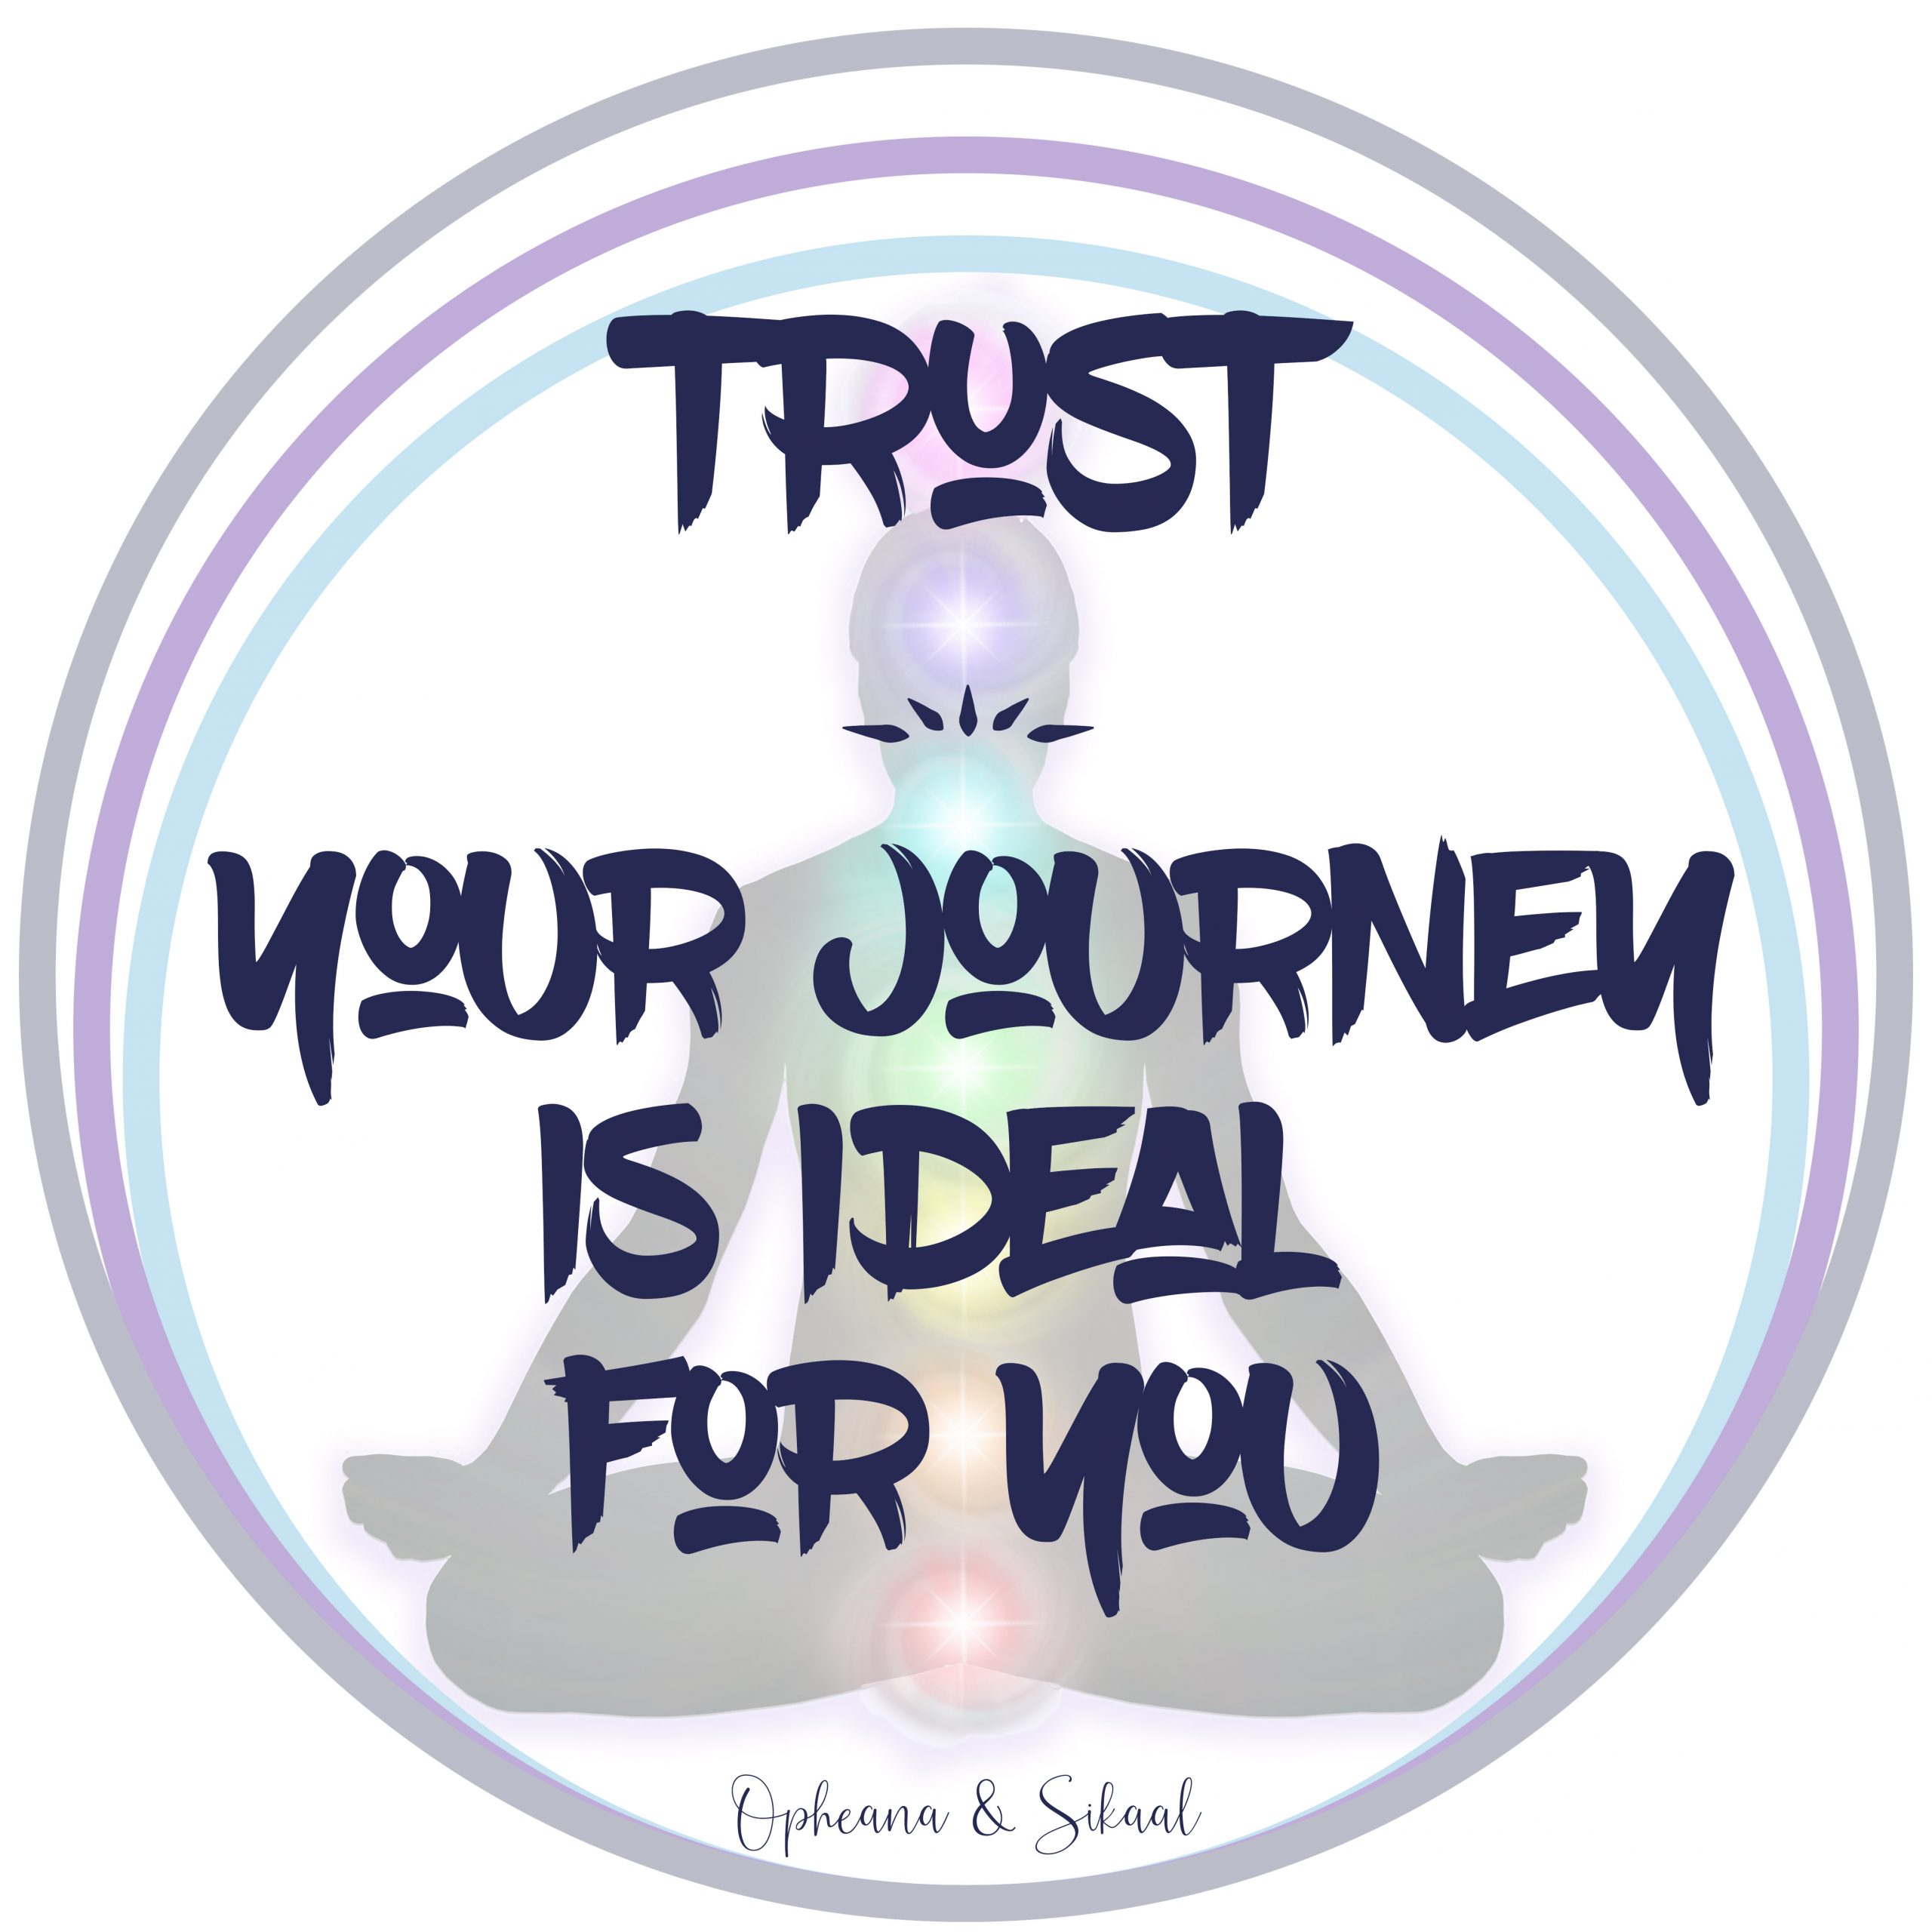 Trust Your Journey is Ideal for You